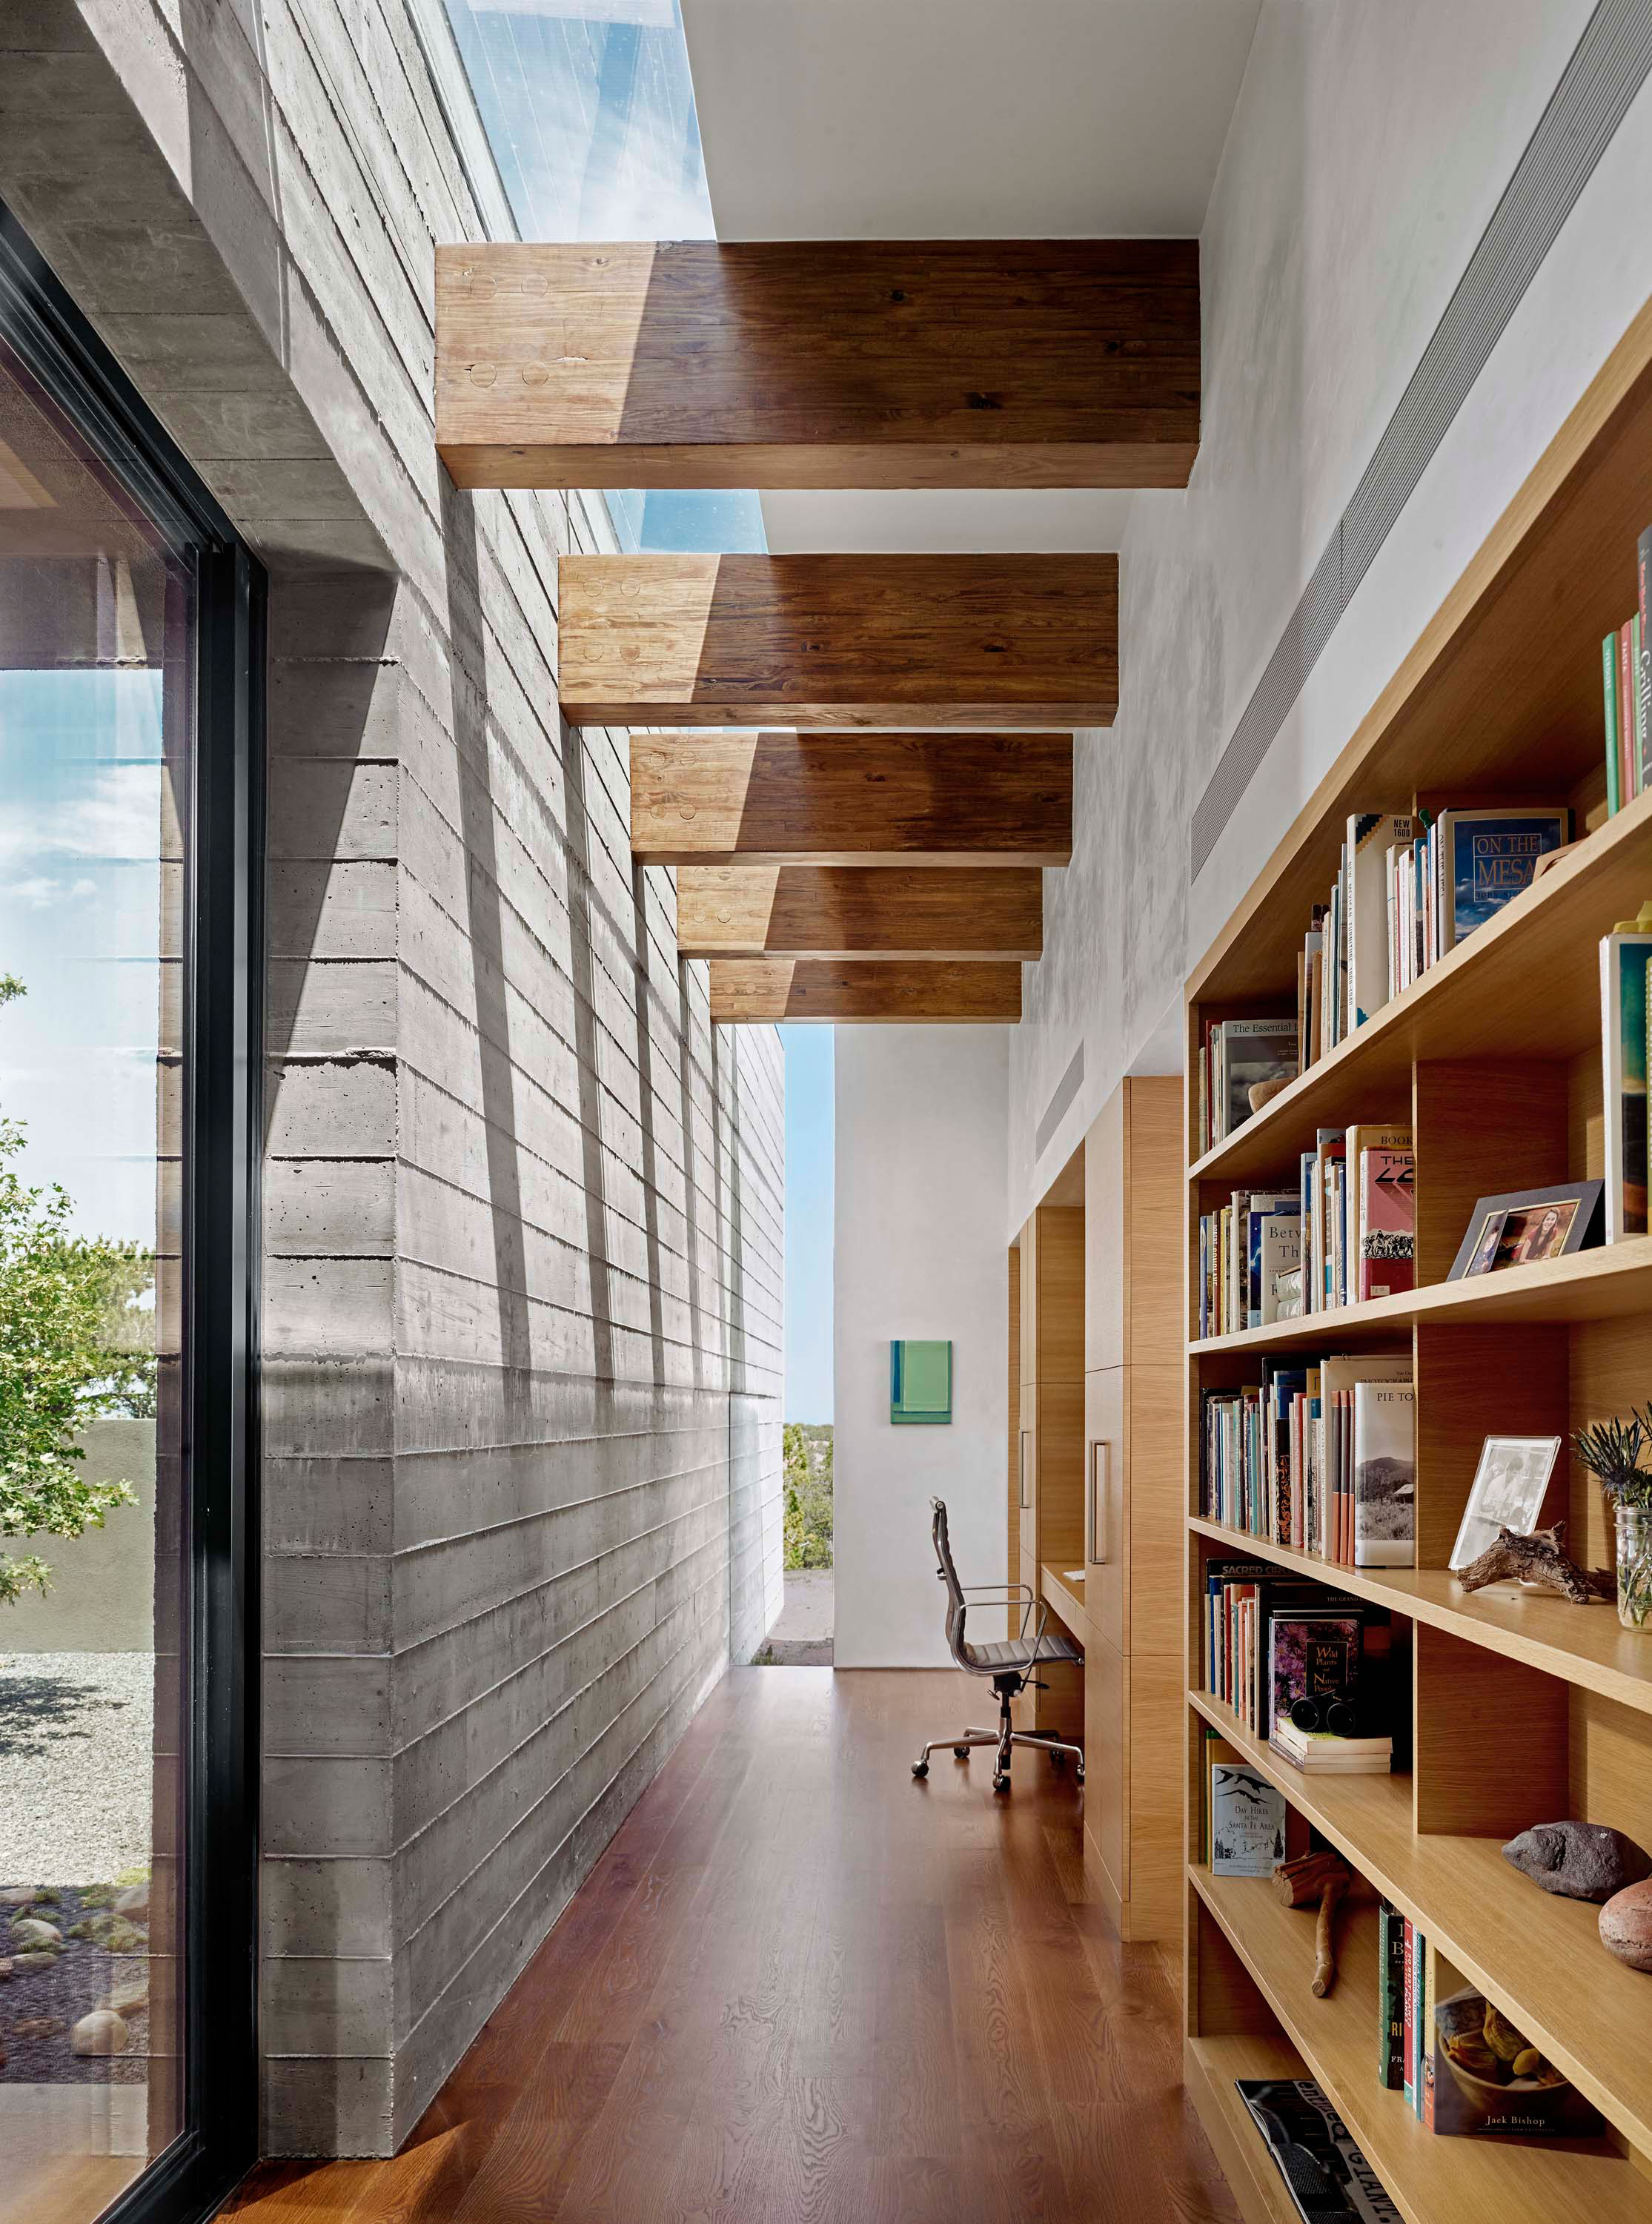 Interior photo of the Sangre de Cristo House by Specht Novak Architects. Shot by Casey Dunn, featuring a bright office space, bookshelves, and beamed ceiling across a longitudinal hallway.